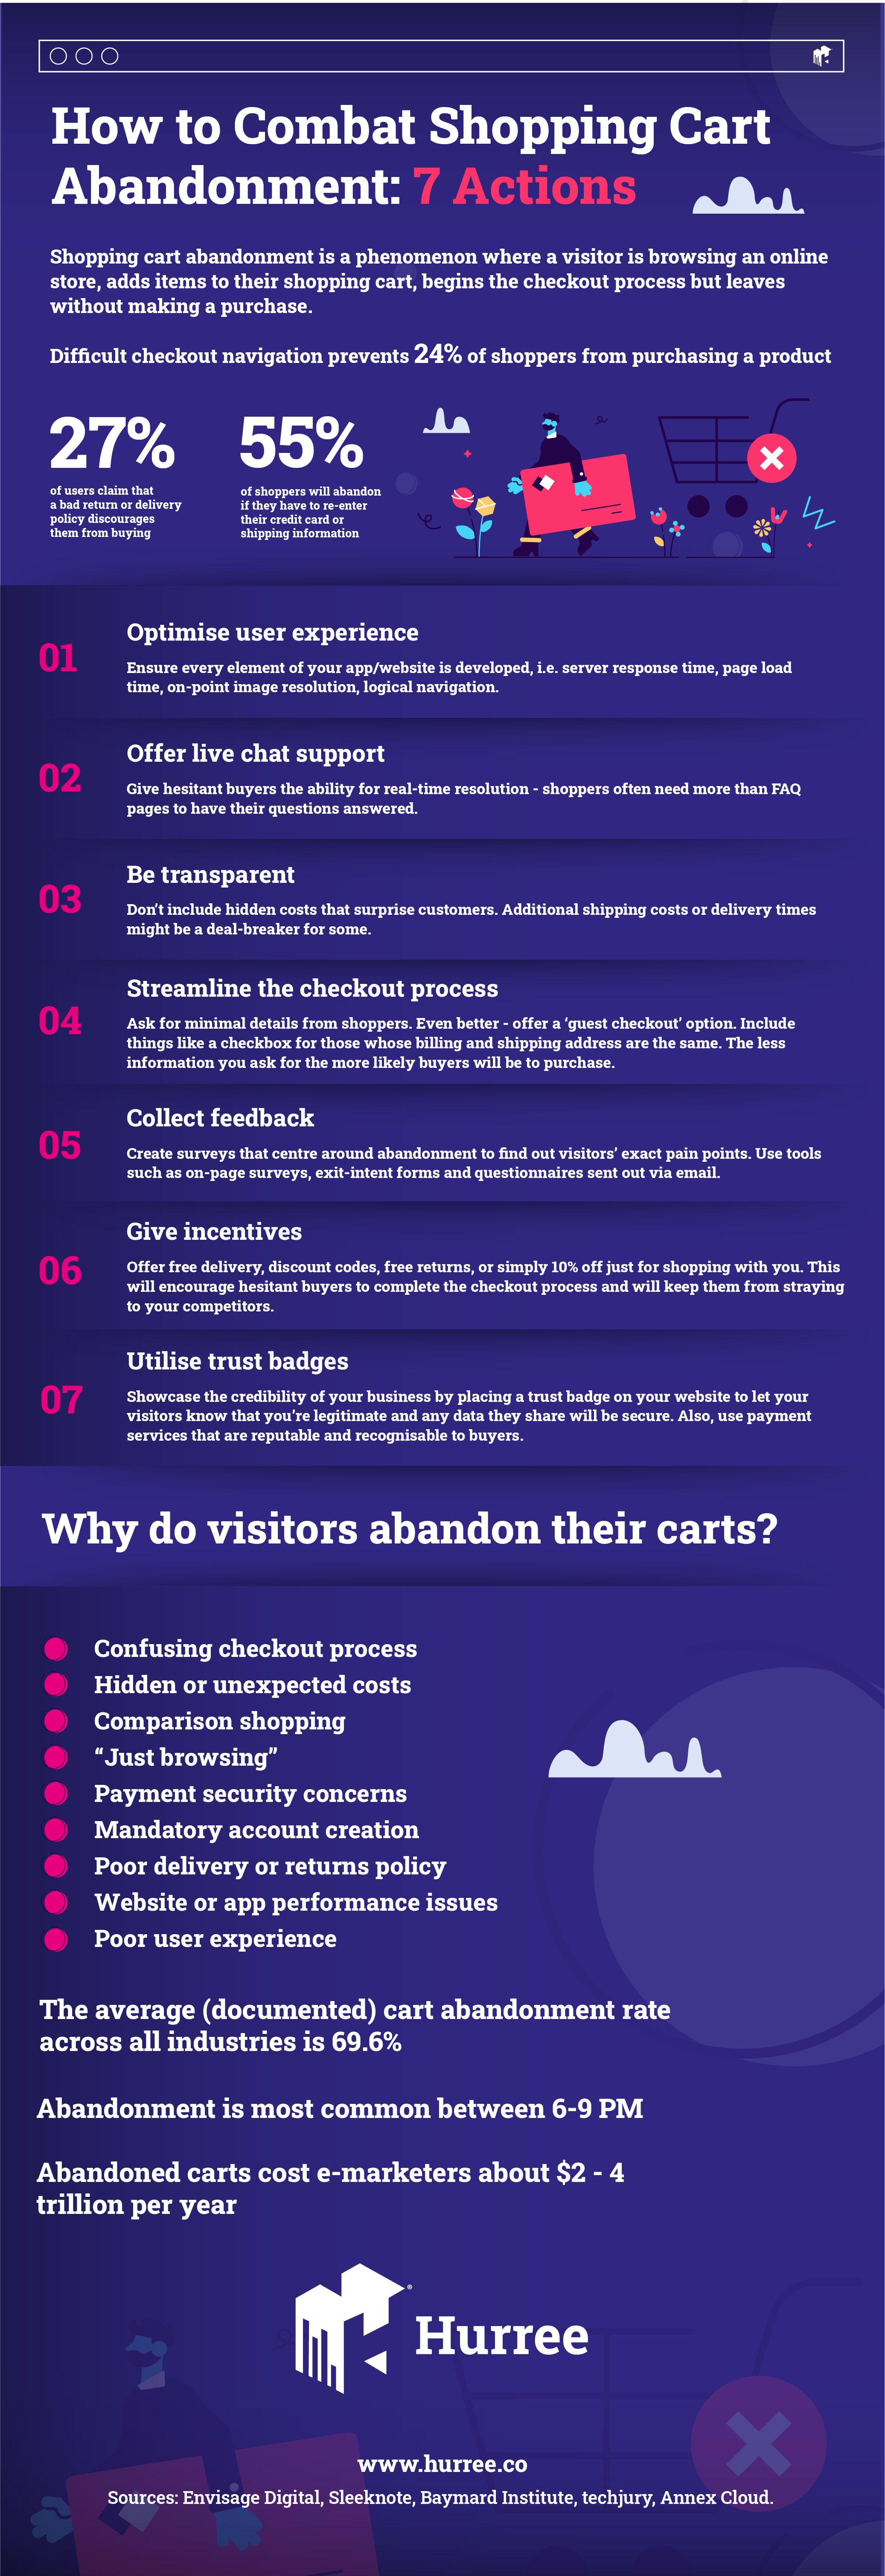 How to Combat Shopping Cart Abandoment: 7 Actions